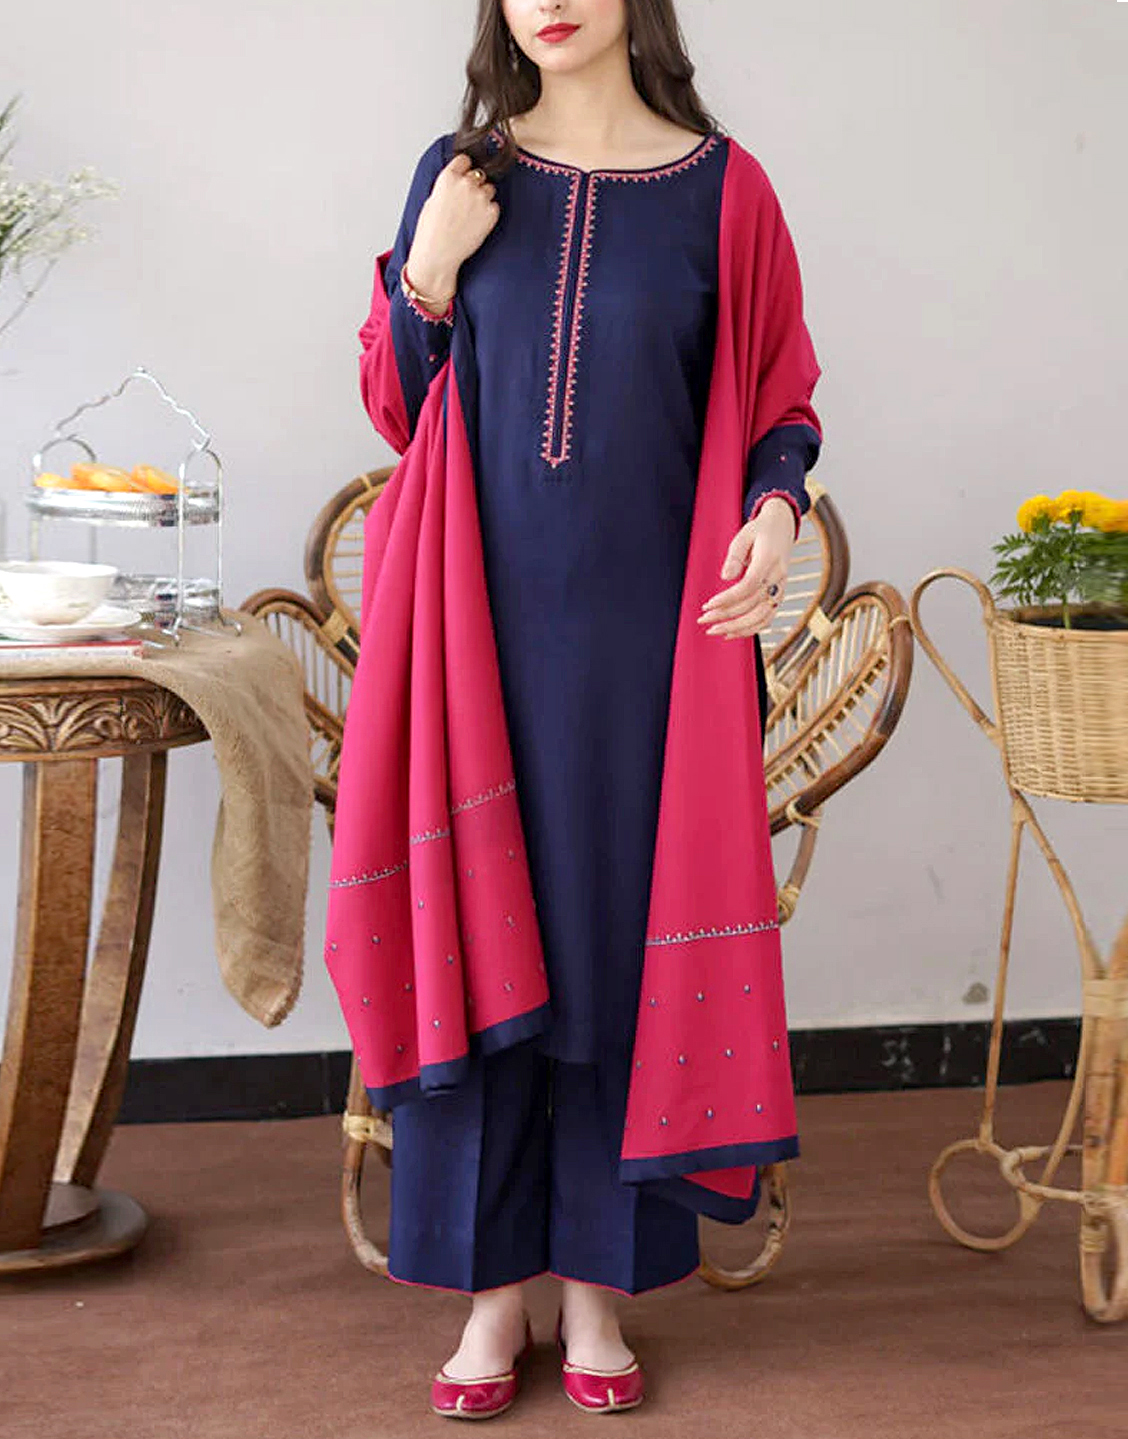 Decent Embroidered Dhanak Dress with Dhanak Shawl Dupatta Price in ...